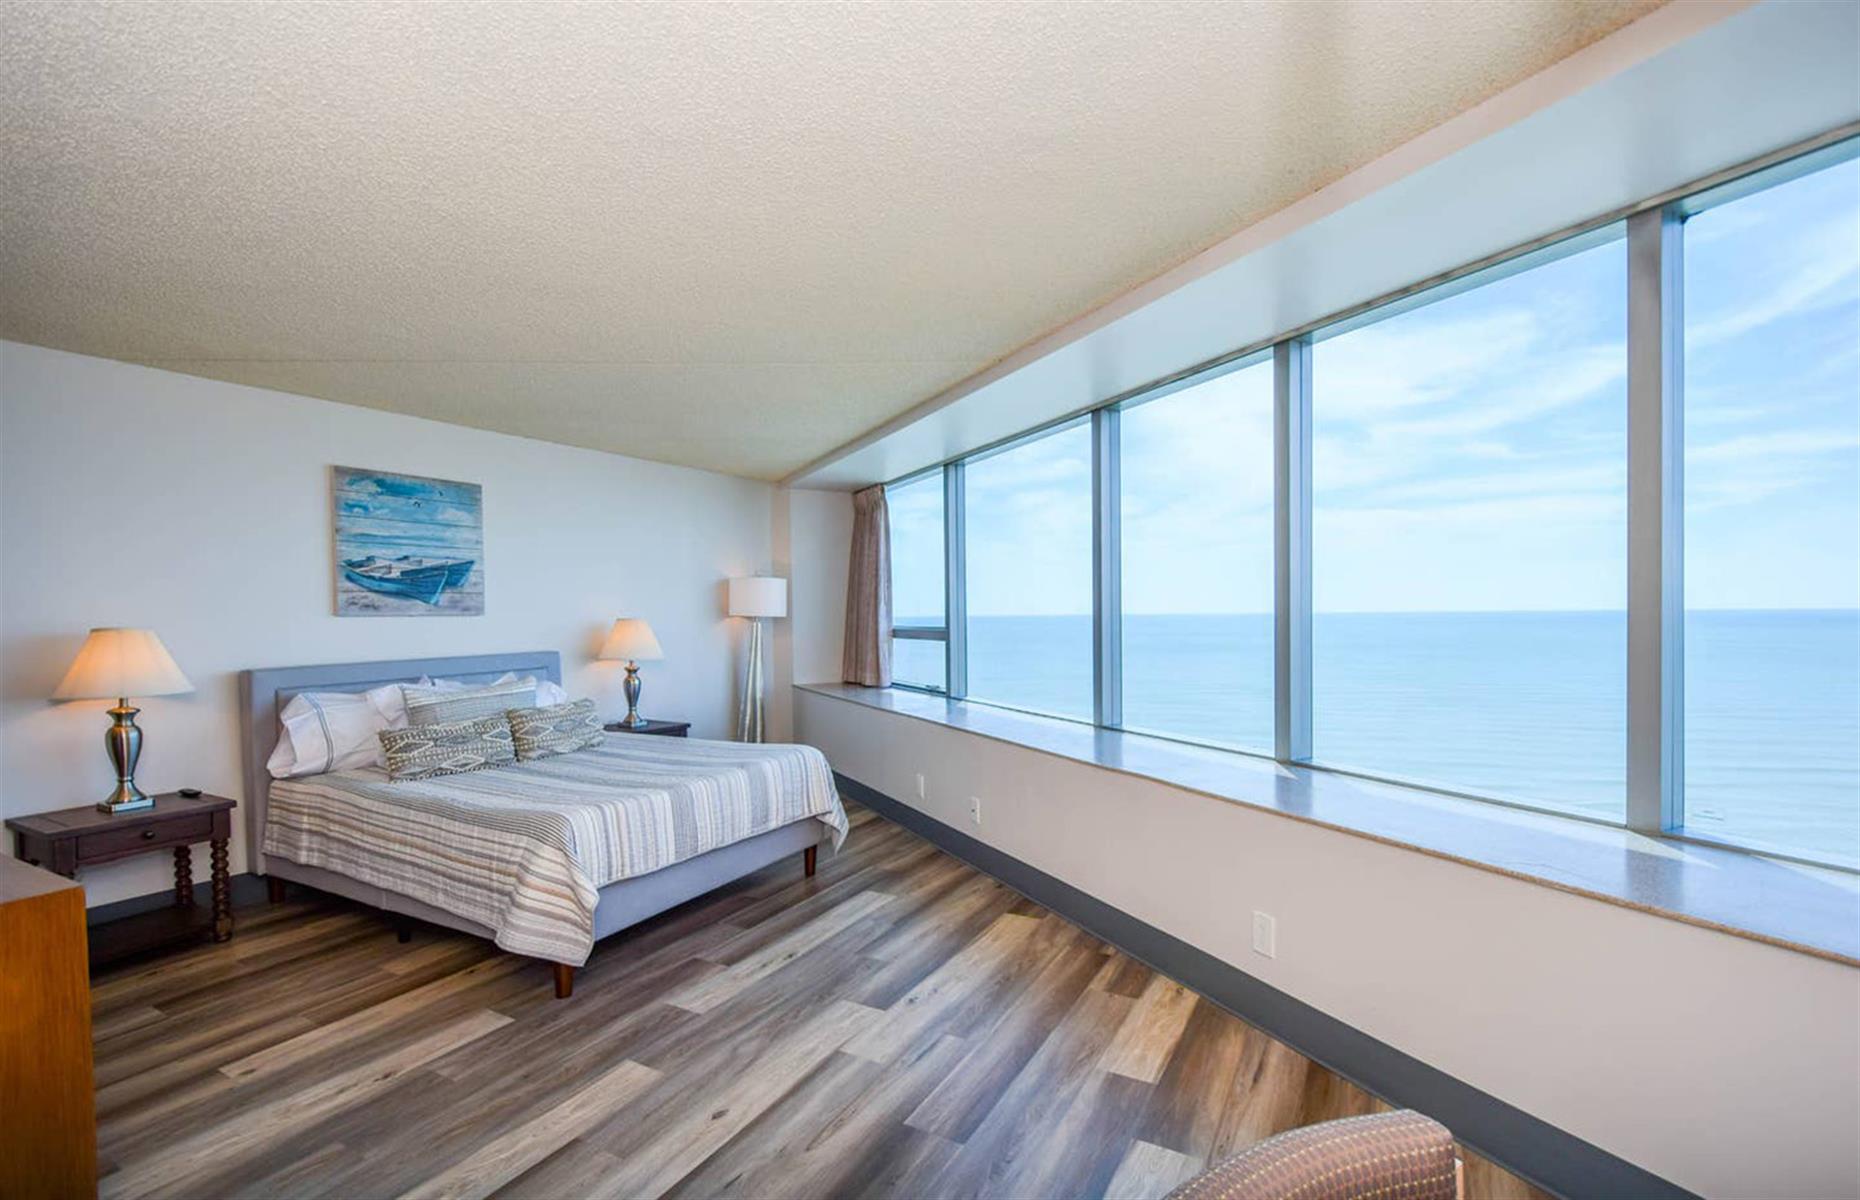 <p>Wake up to expansive ocean views as you open the curtains of <a href="https://www.airbnb.co.uk/rooms/34945530">this studio flat</a> located on the 26th floor. For $88 a night you'll get a queen-size bed, a small kitchenette, a swish bathroom and a picture window spanning the whole length of the wall. It's also conveniently located for all of the top <a href="https://www.atlanticcitynj.com/">Atlantic City attraction</a>s, including the boardwalk and the casinos – check ahead to see <a href="https://www.atlanticcitynj.com/explore/">what's open right now</a>. </p>